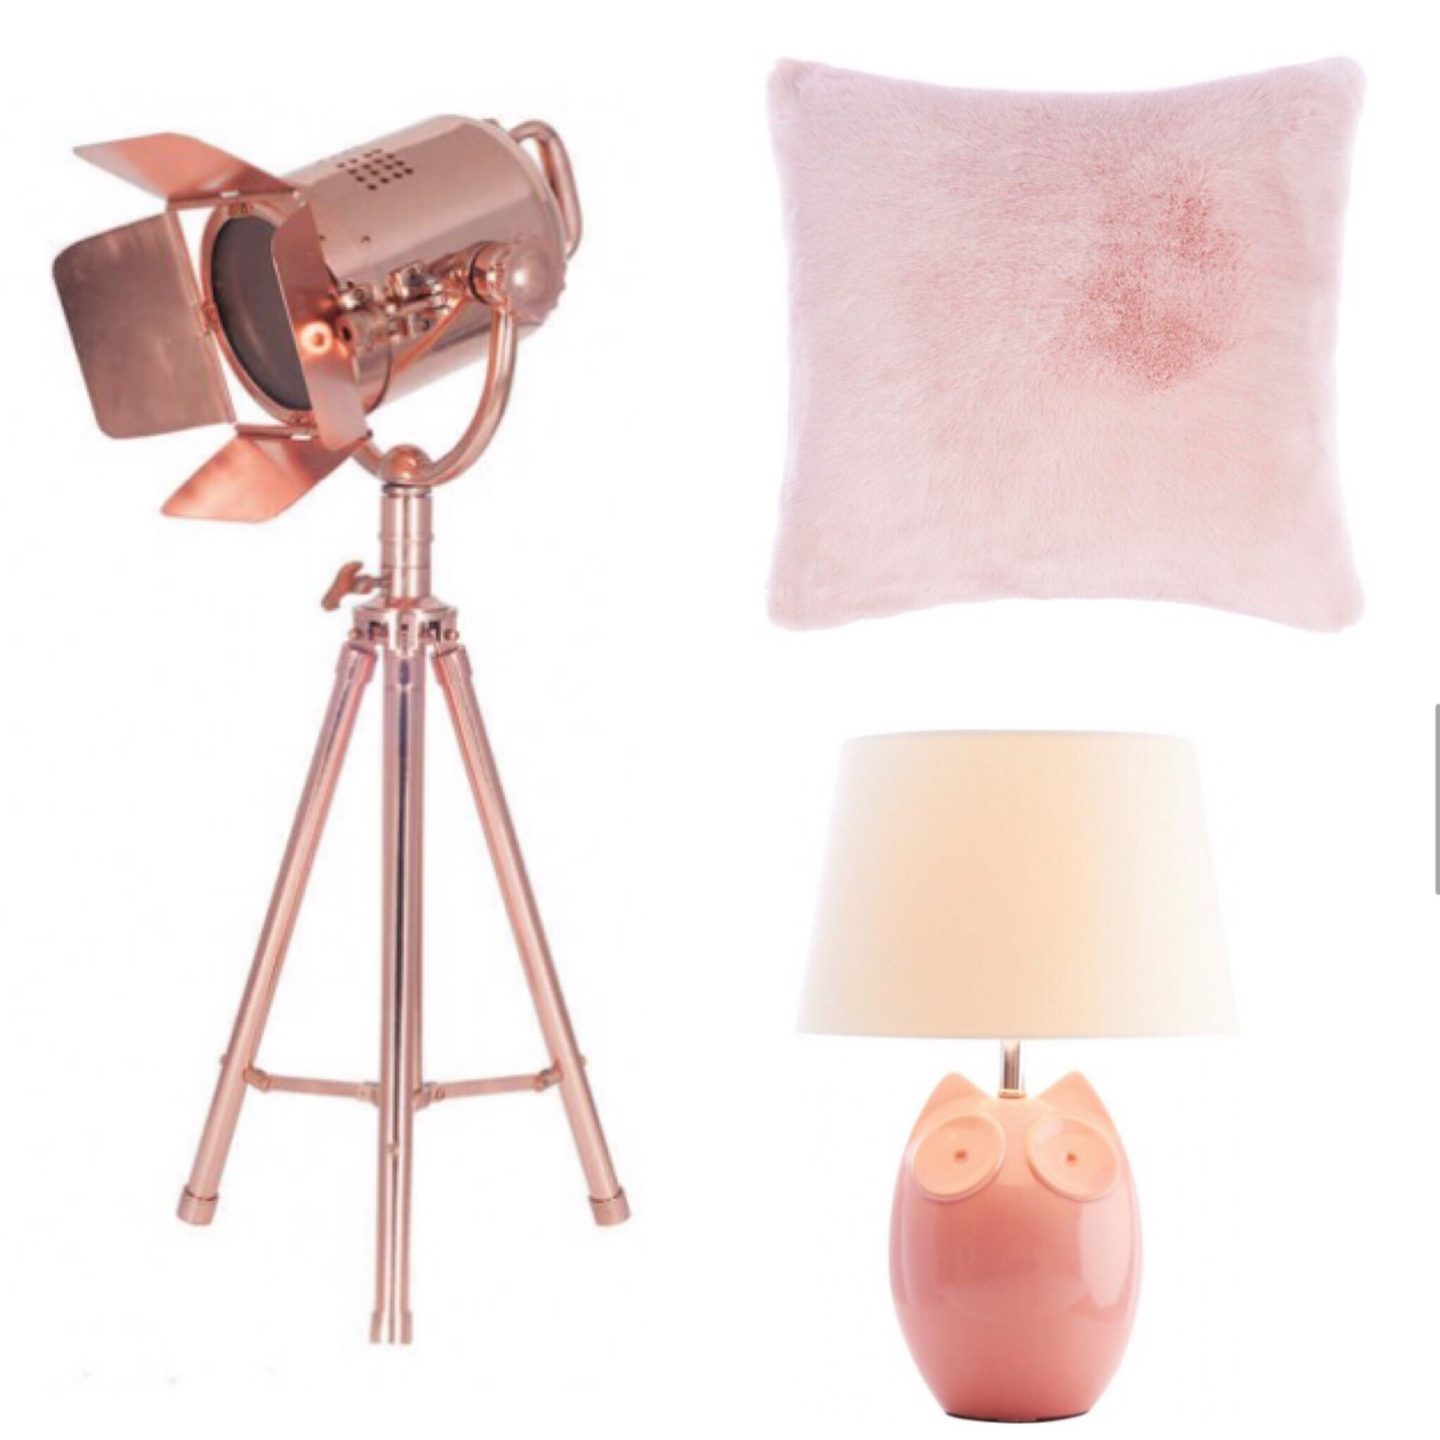 The Finishing Touches: All the love for pink and copper